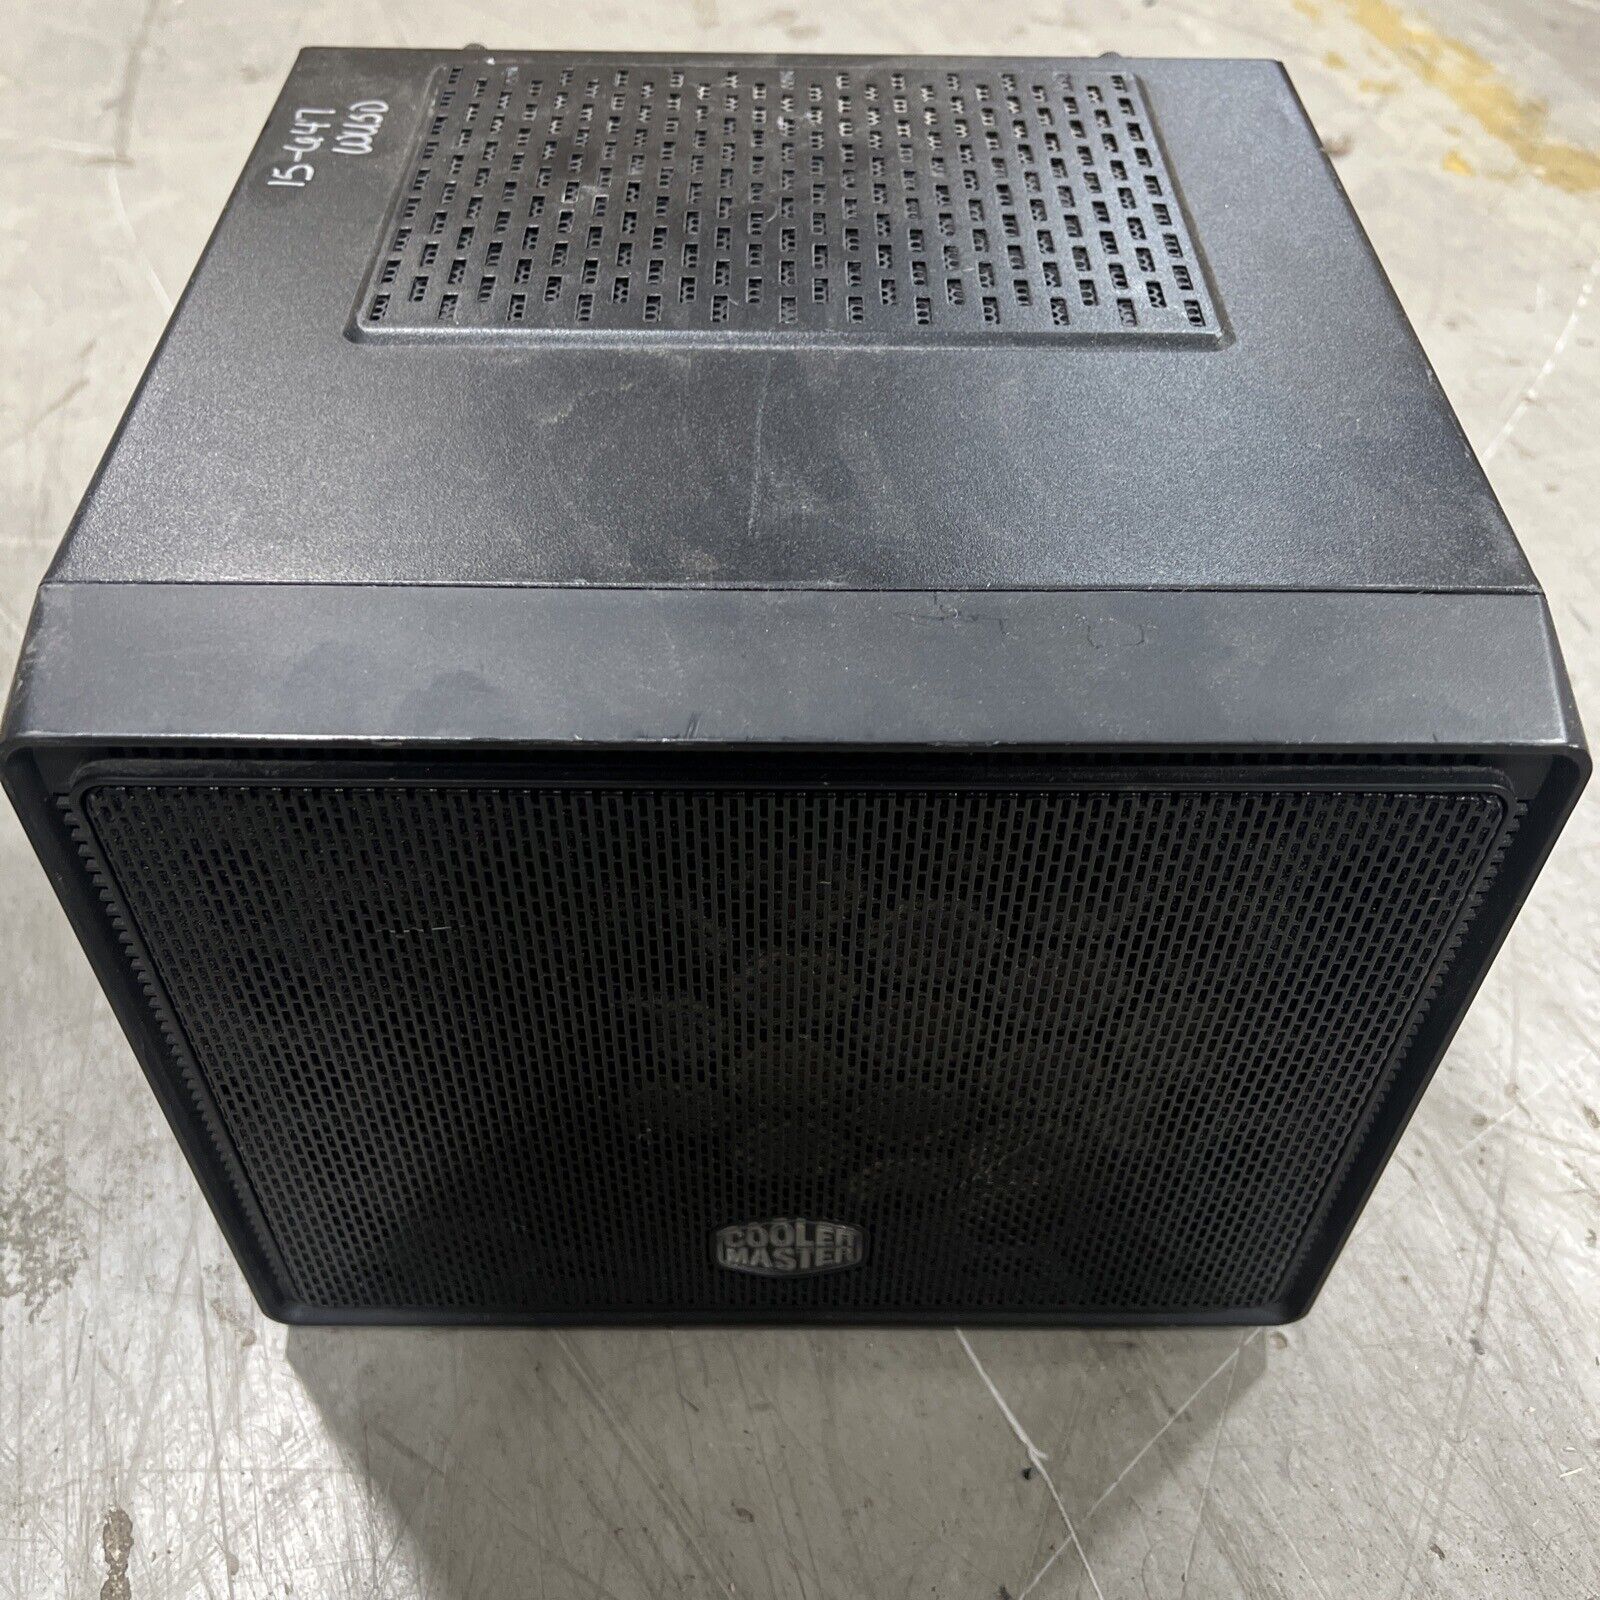 Cooler Master Elite 110 RC-110-KKN2 with Power Supply Unit